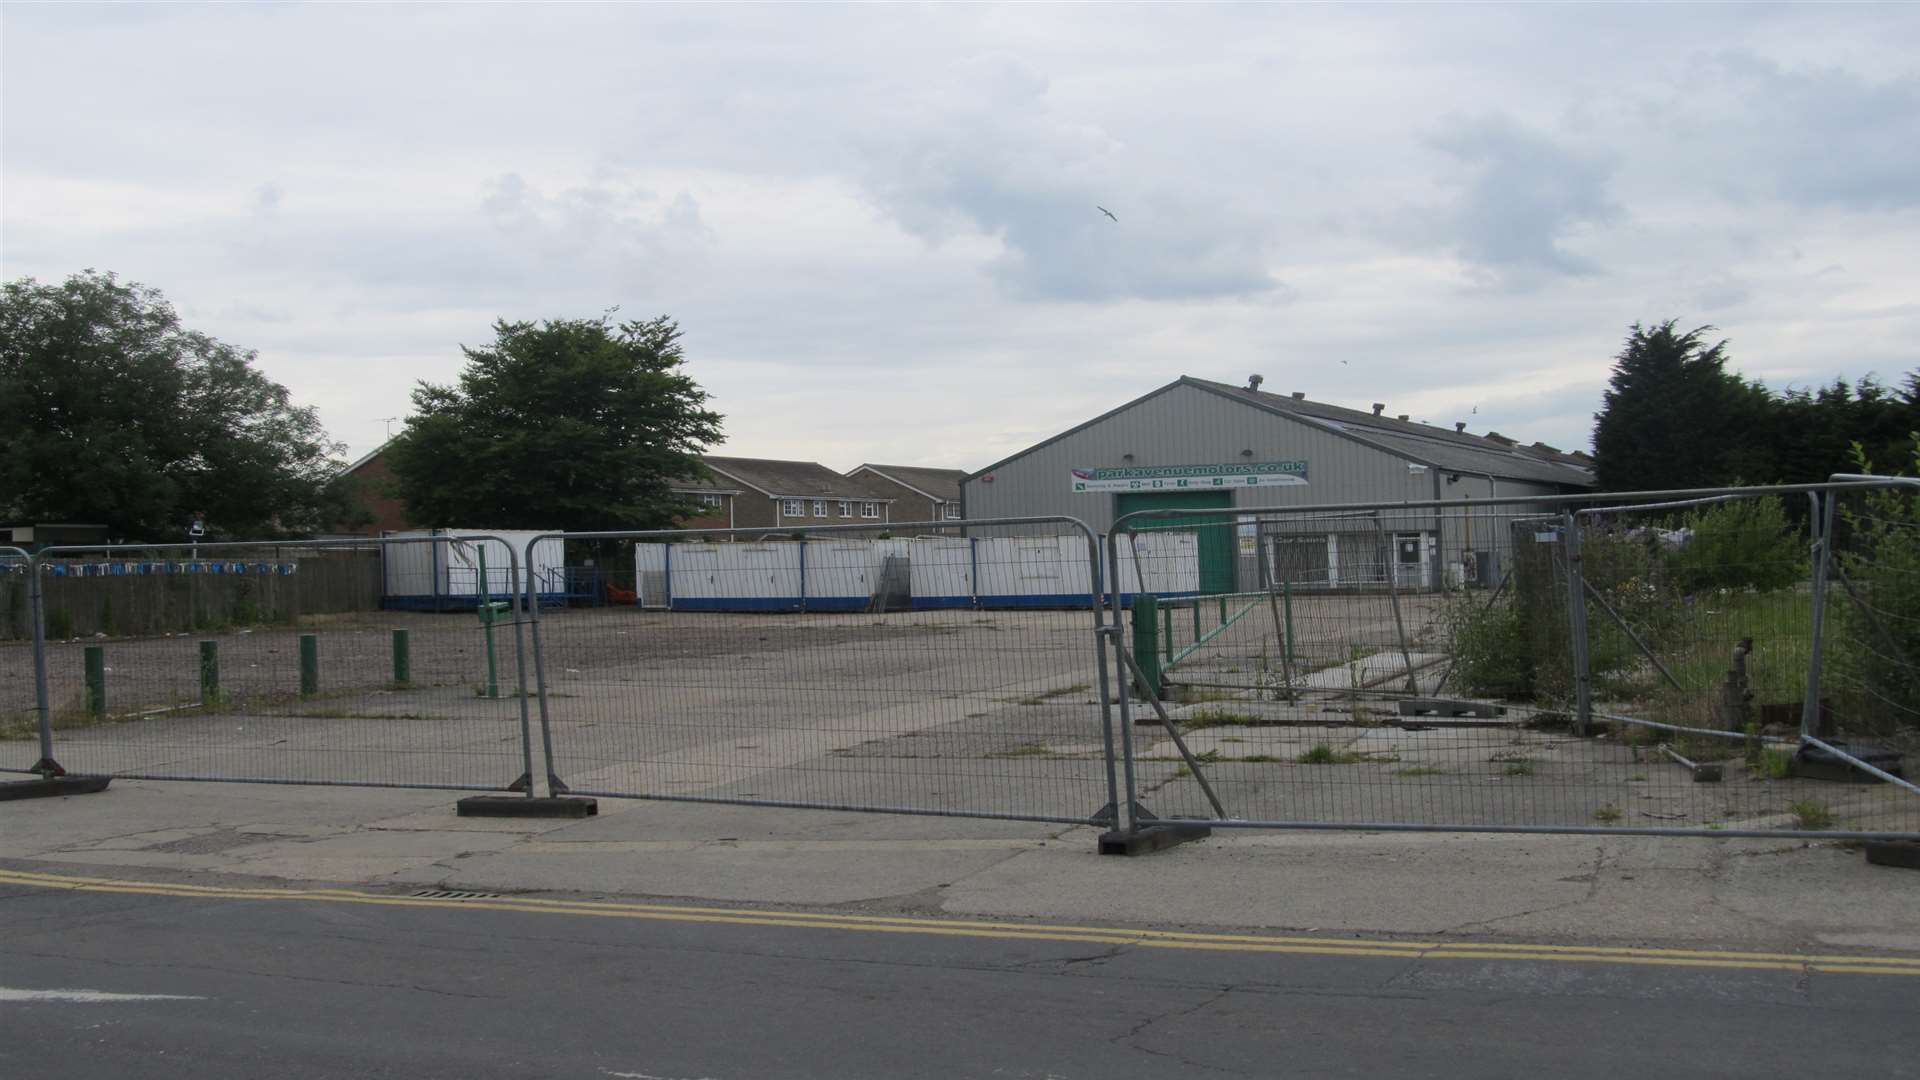 Albert Road, Deal: where the new supermarket could be built